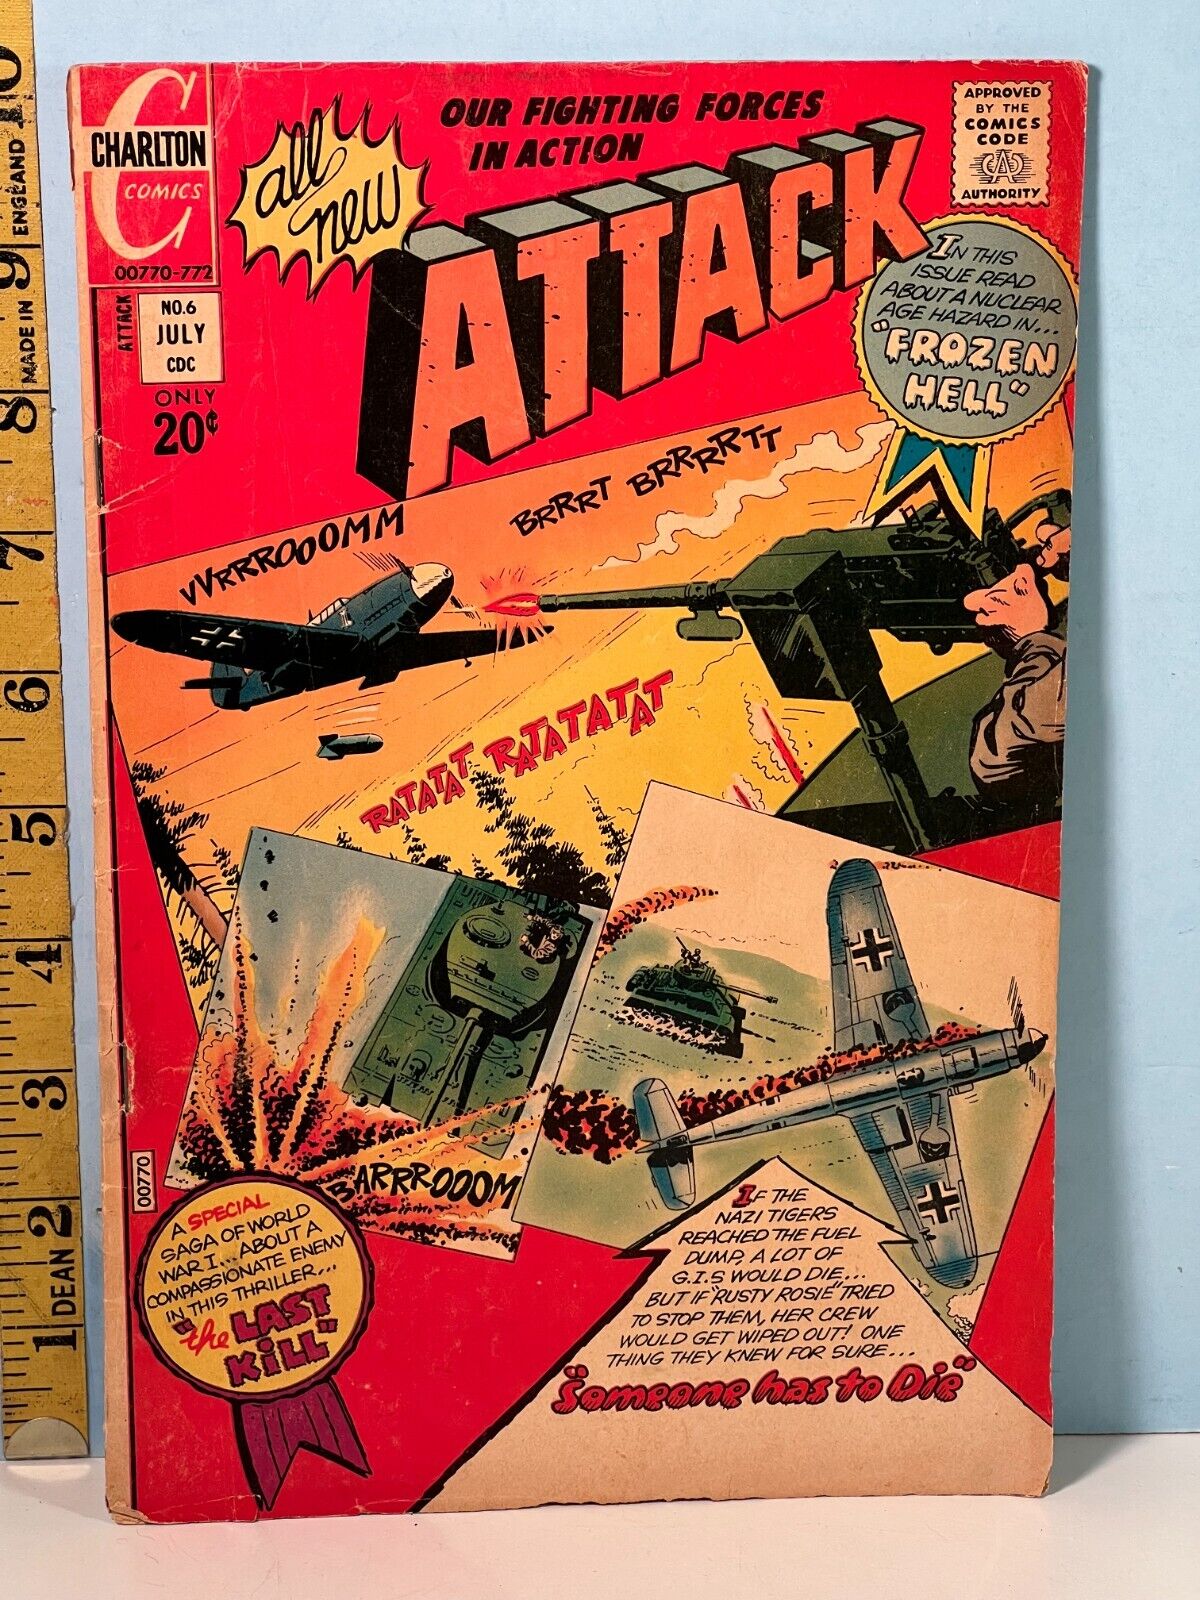 1972 ATTACK Our Fighting Forces in Action Charleton Comics